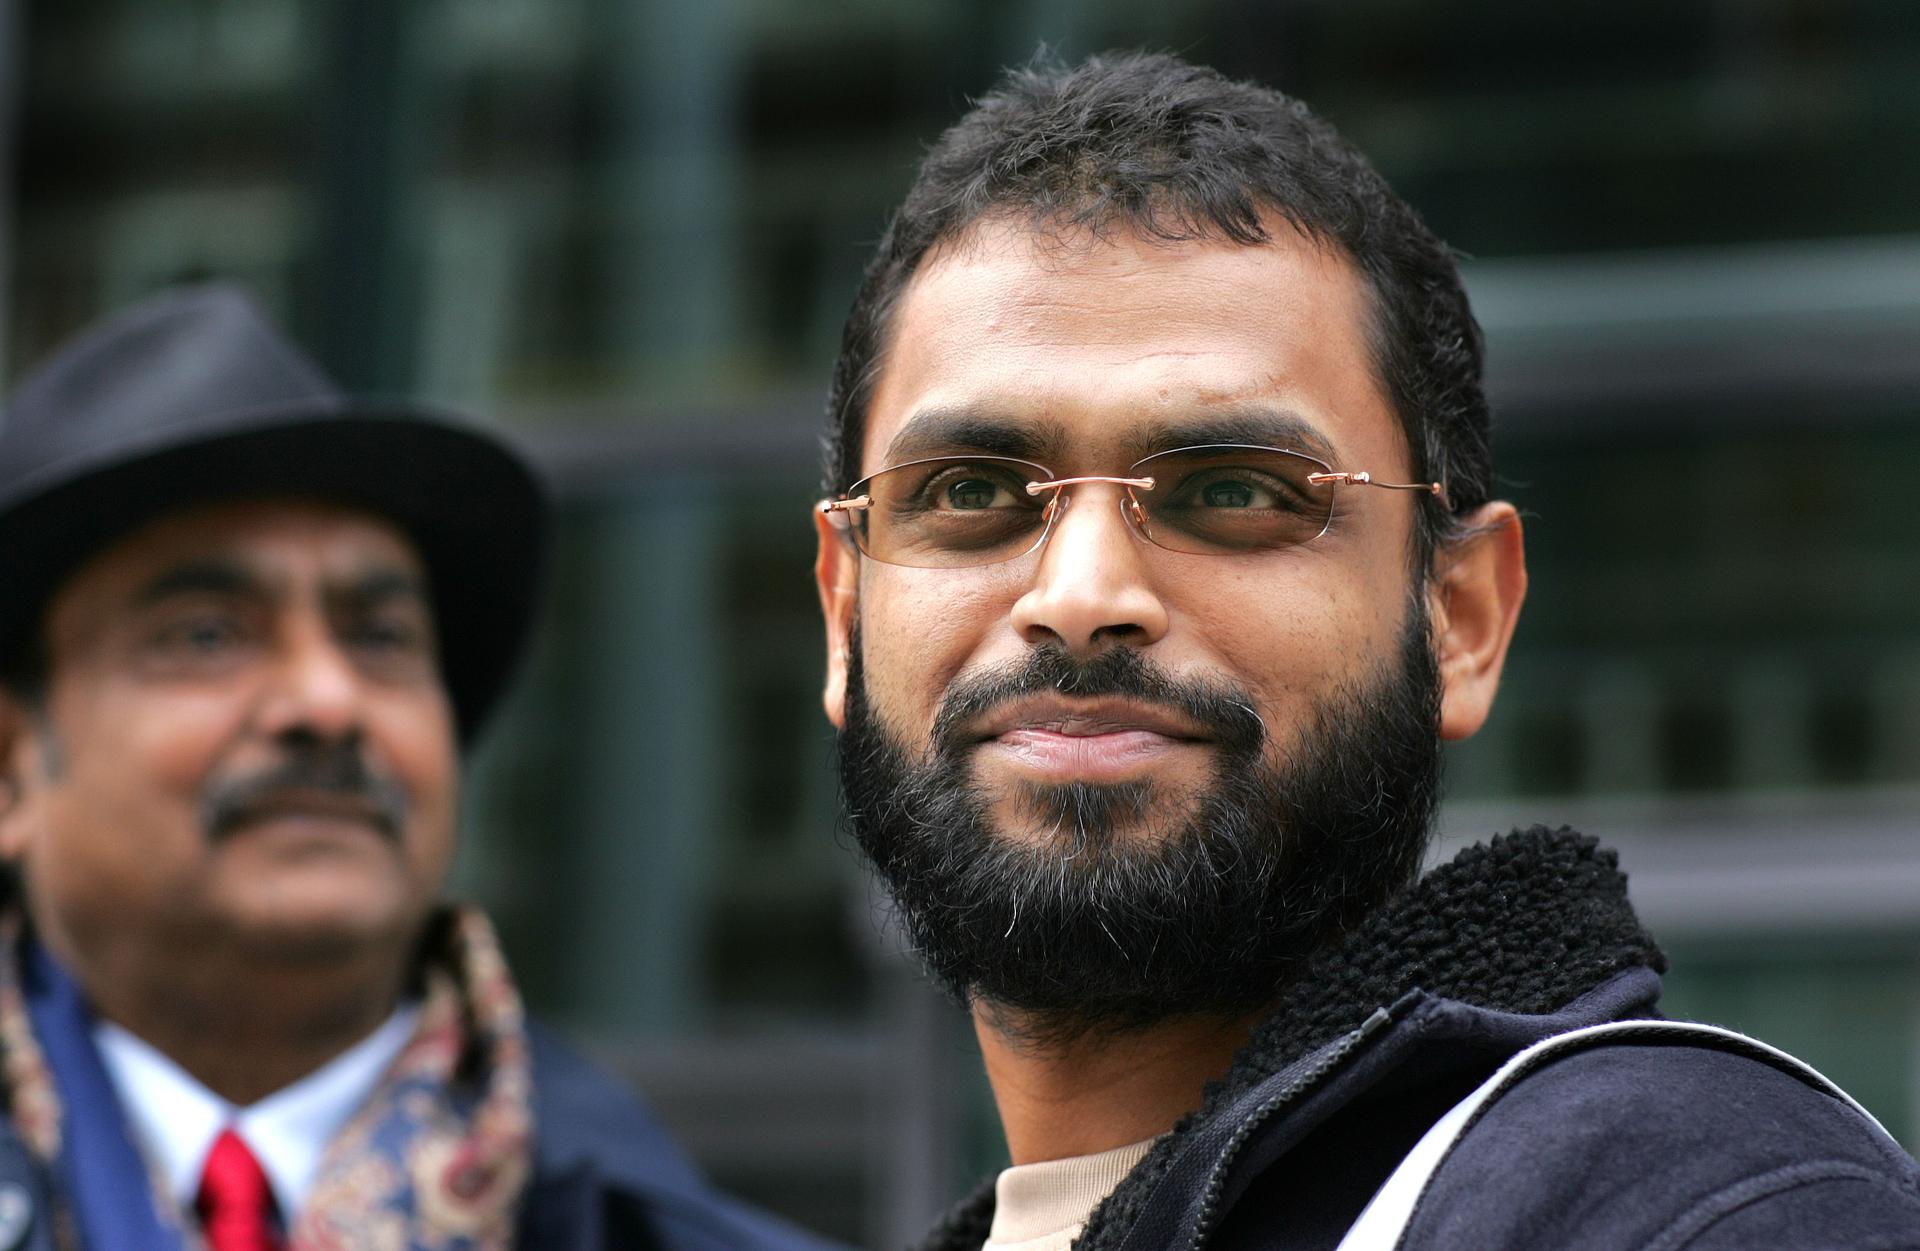 Freed Guantanamo Bay detainee Moazzam Begg stands outside the Home Office with his father, Azmat, after delivering a petition in London on March 14, 2005.